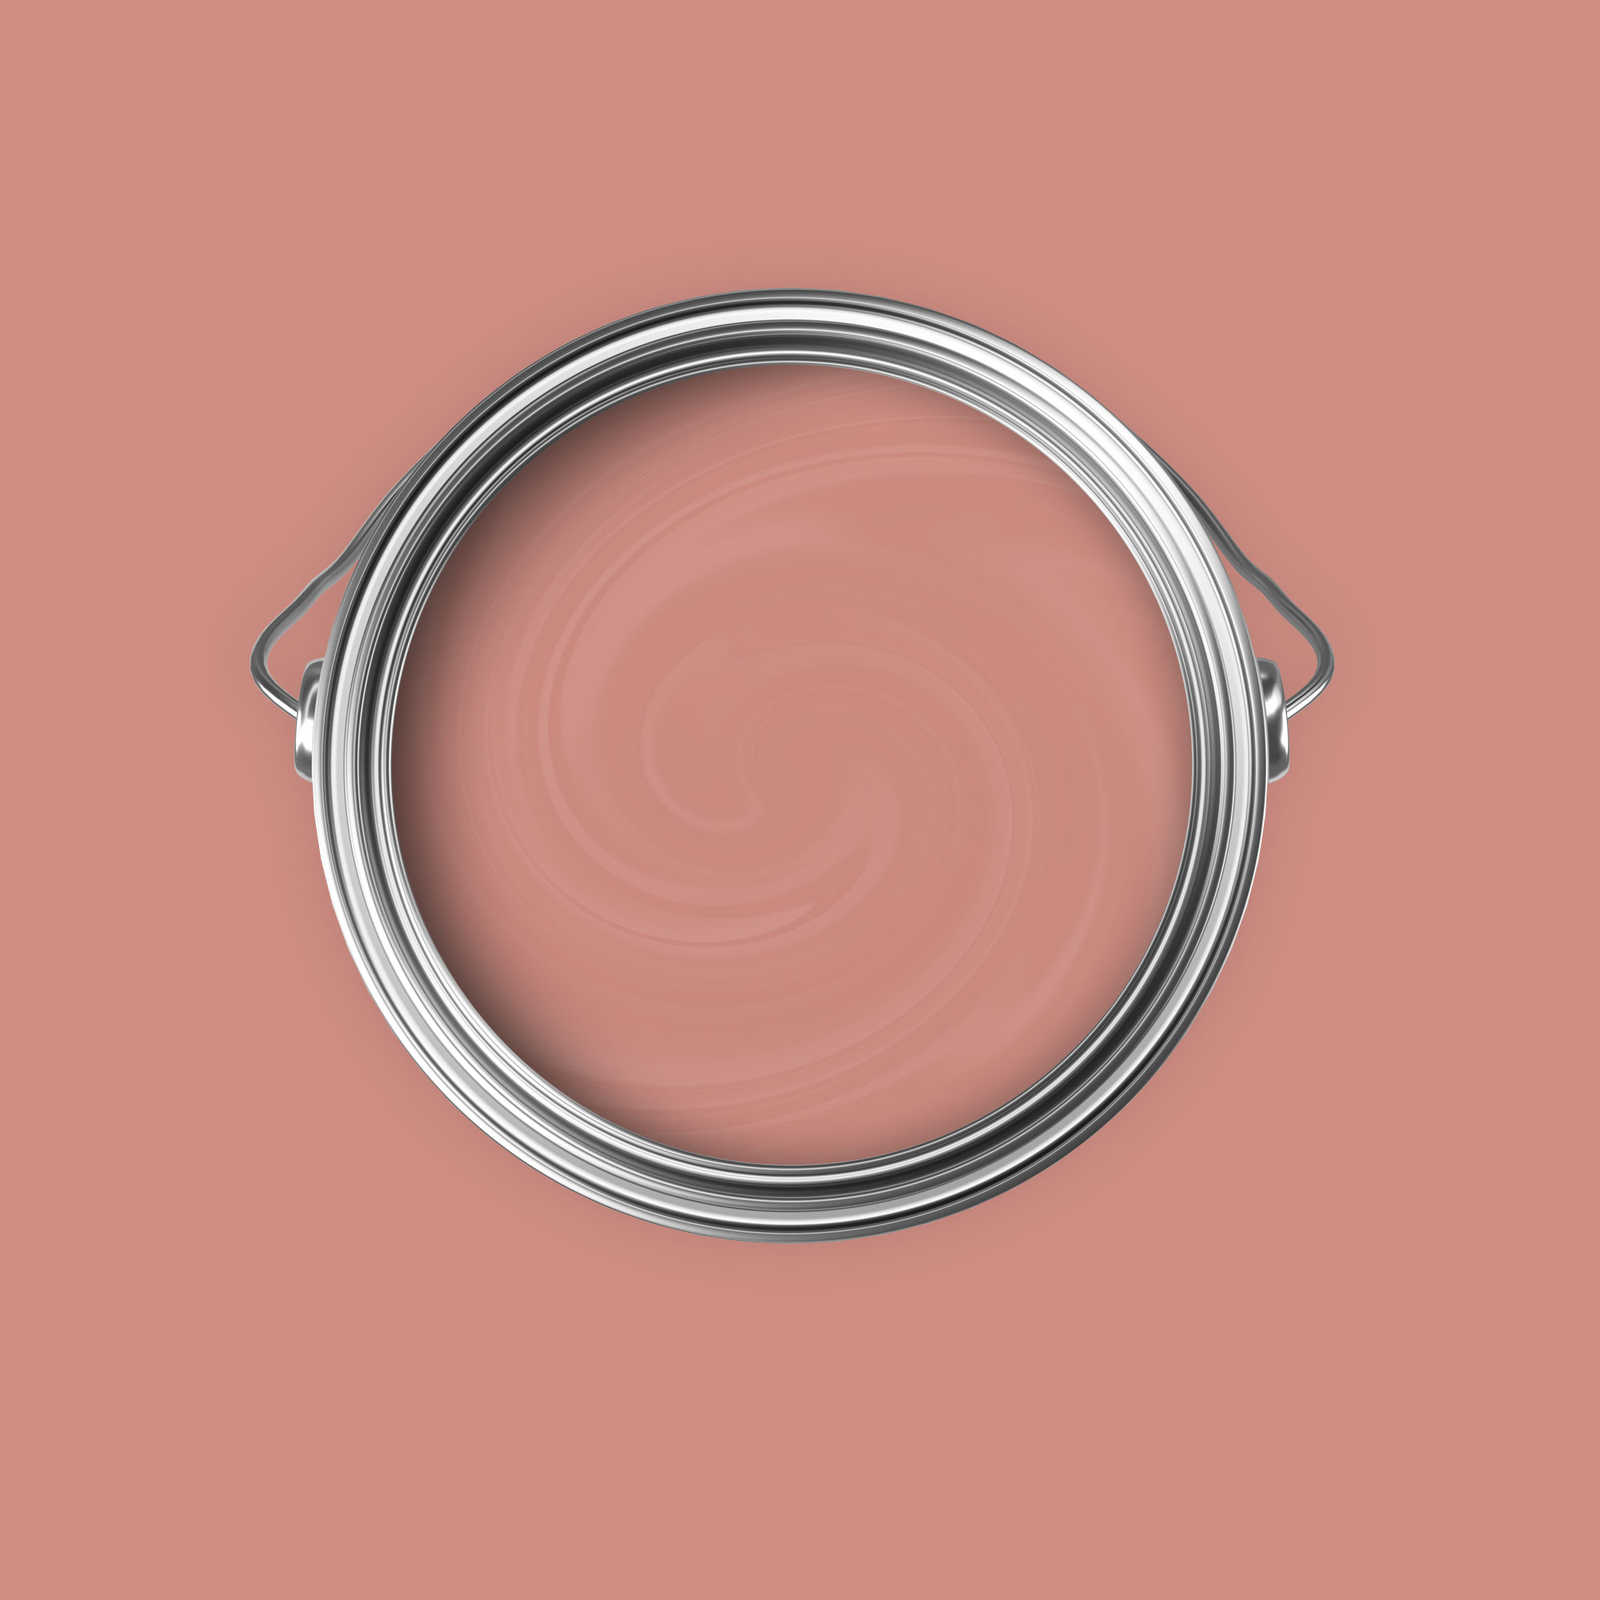             Premium Wall Paint Relaxing Salmon »Luxury Lipstick« NW1004 – 5 litre
        